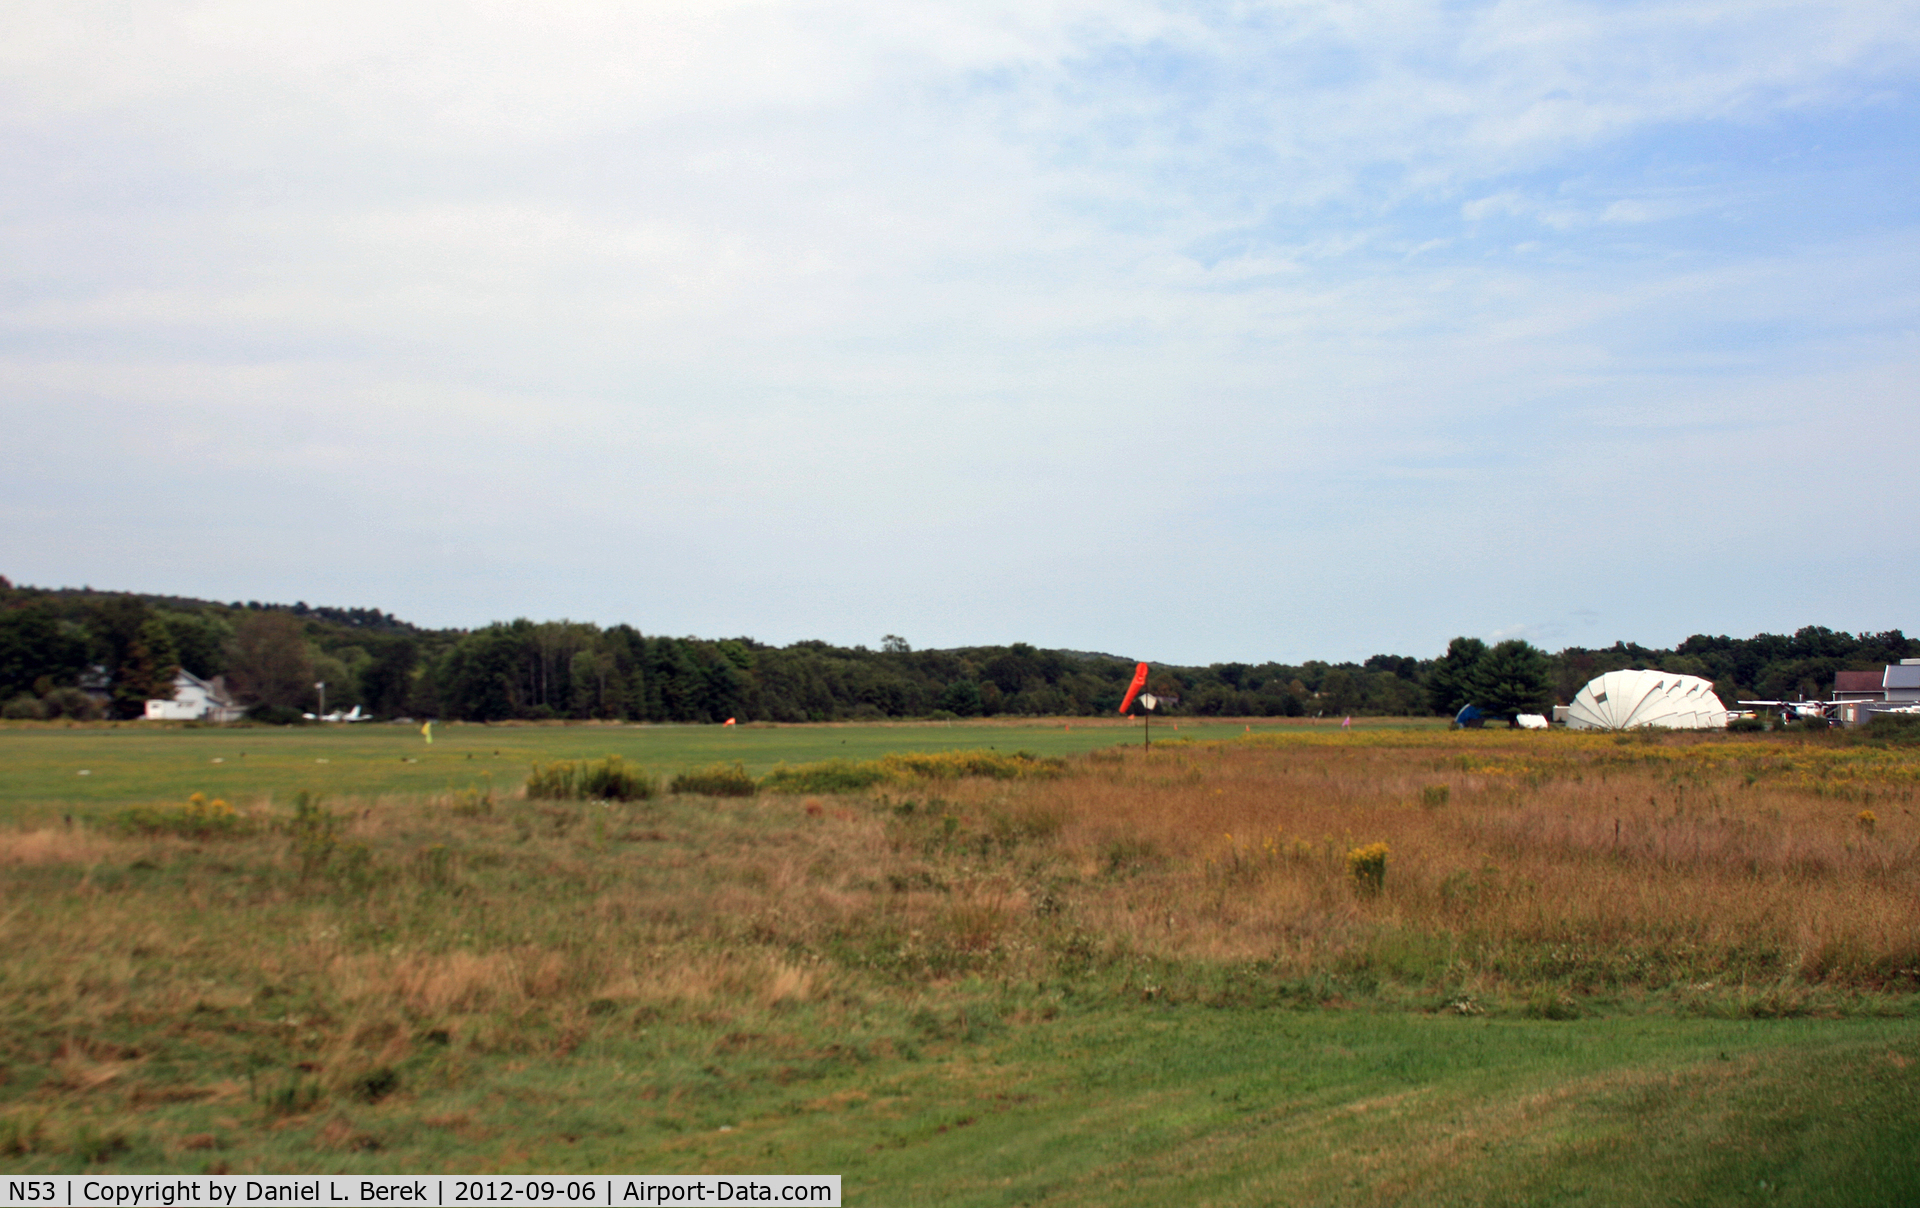 Stroudsburg-pocono Airport (N53) - This little airport offers skydiving experiences from two turboprop aircraft; the main hangar is off to the right.